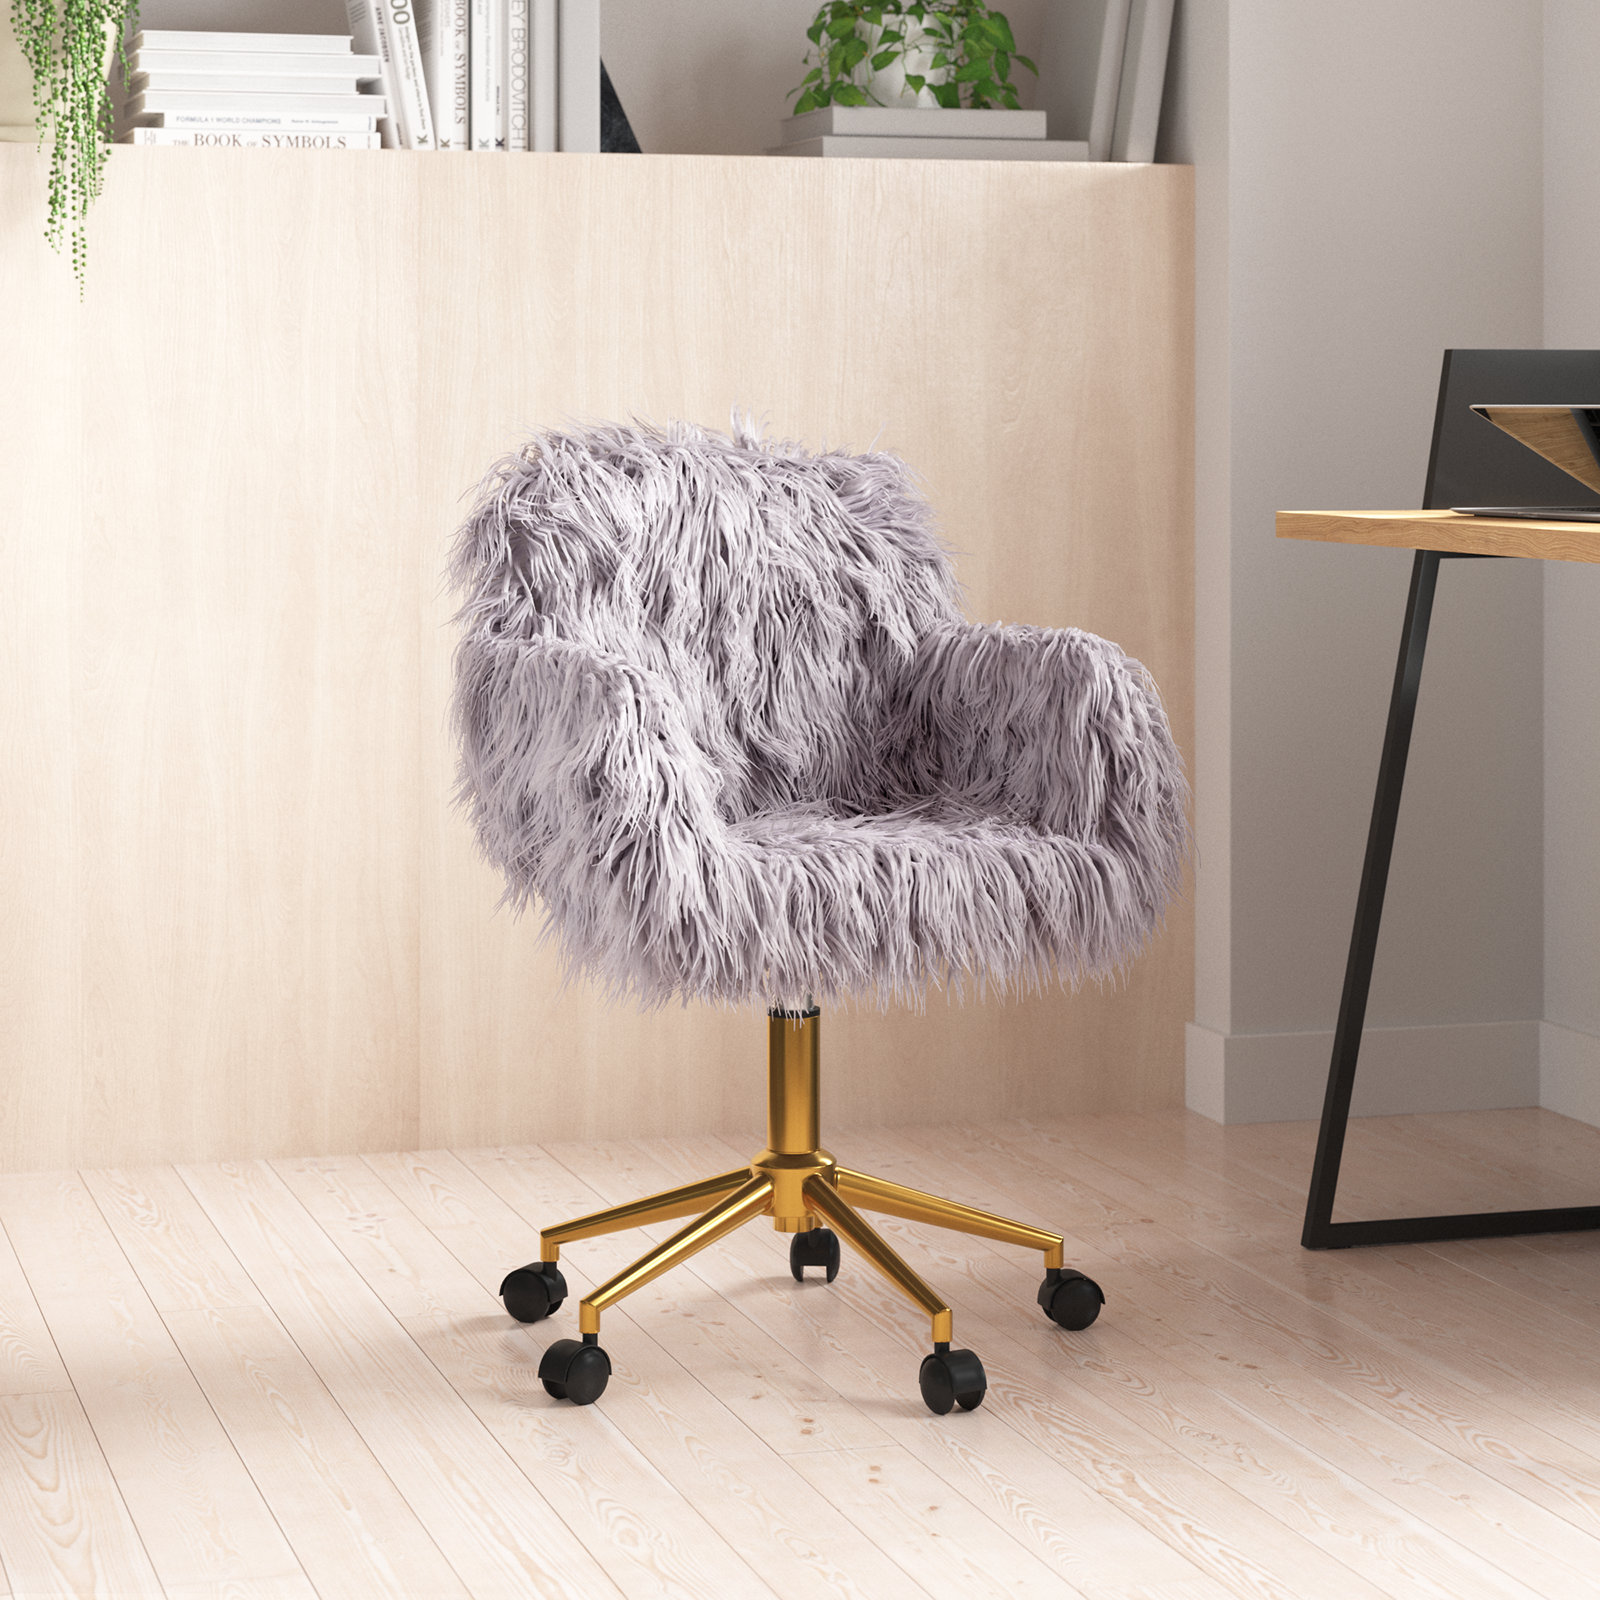 Vanity Chairs with Backs, Cute Fluffy Upholstered Padded Seat